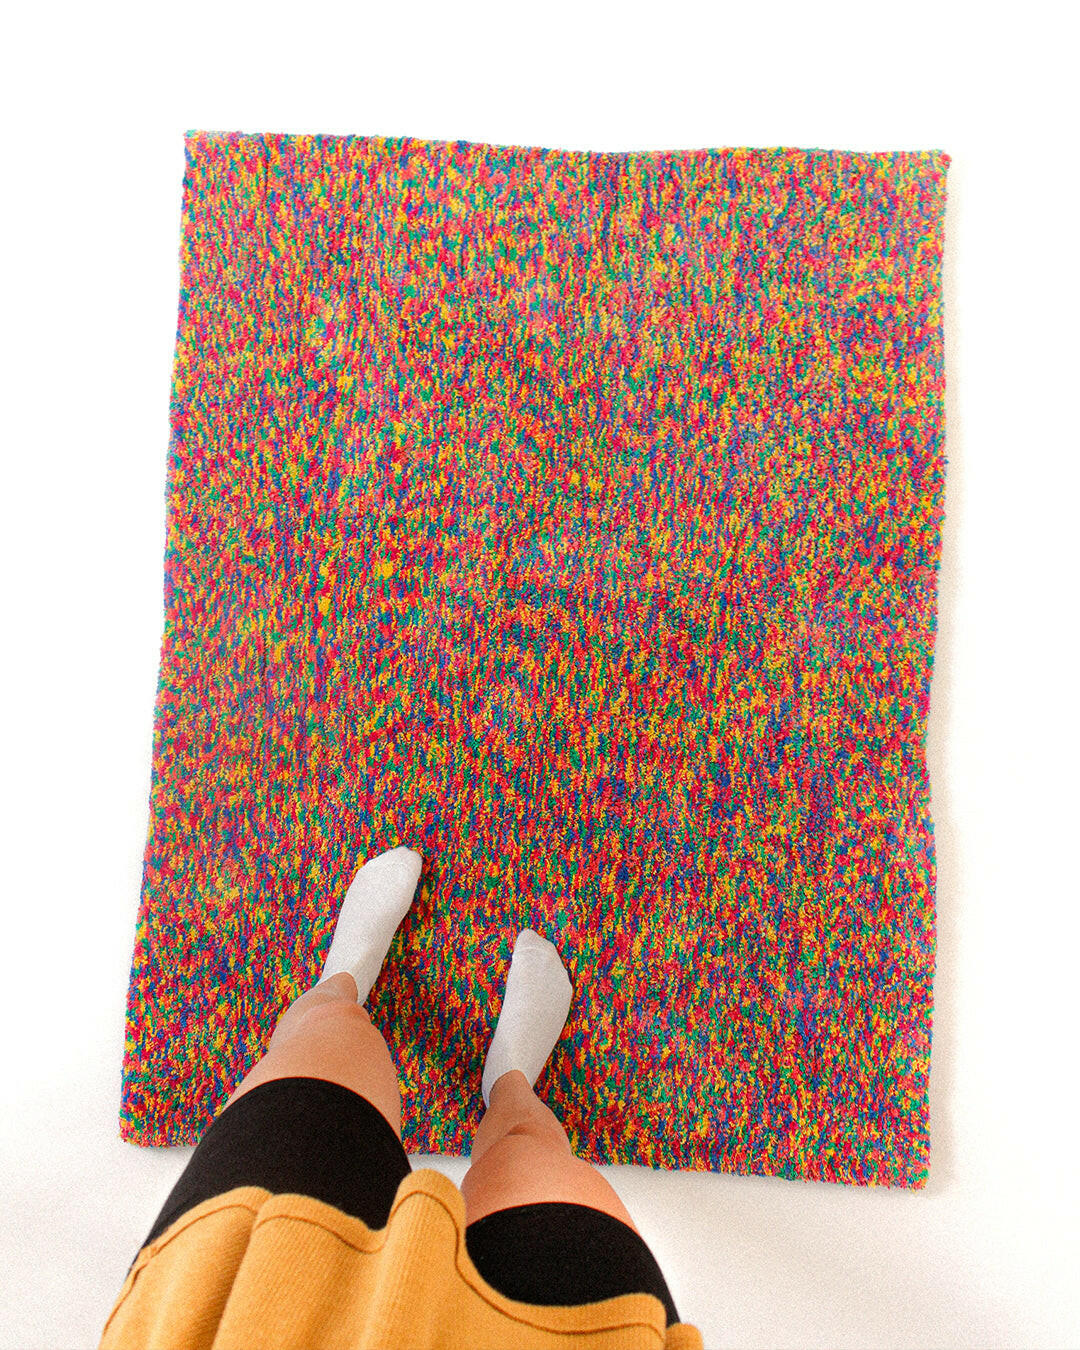 Eclectic colorful rug. Jubi original design hand made in Brooklyn, NY using 100% recycled cotton